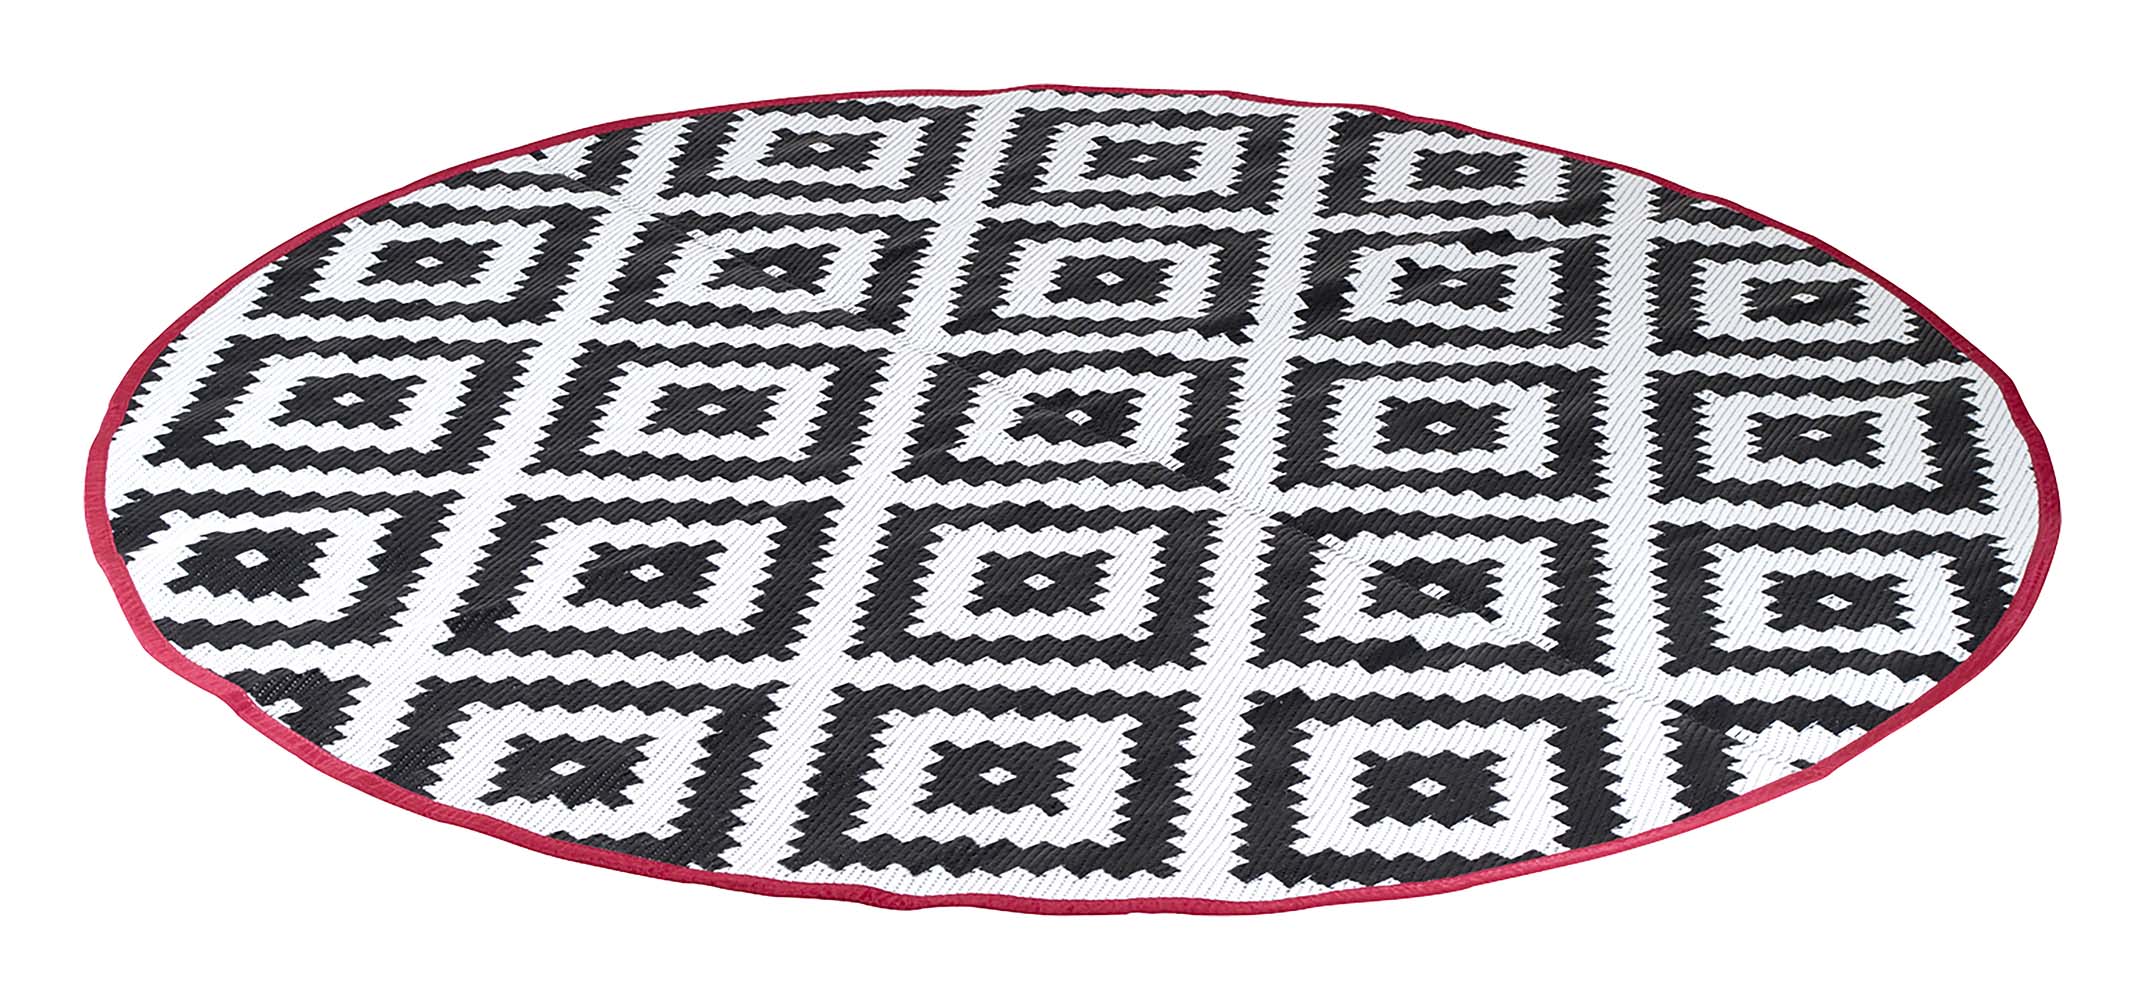 Bo-Camp - Urban Outdoor collection - Chill mat - Falconwood - Rond - Zwart/Wit